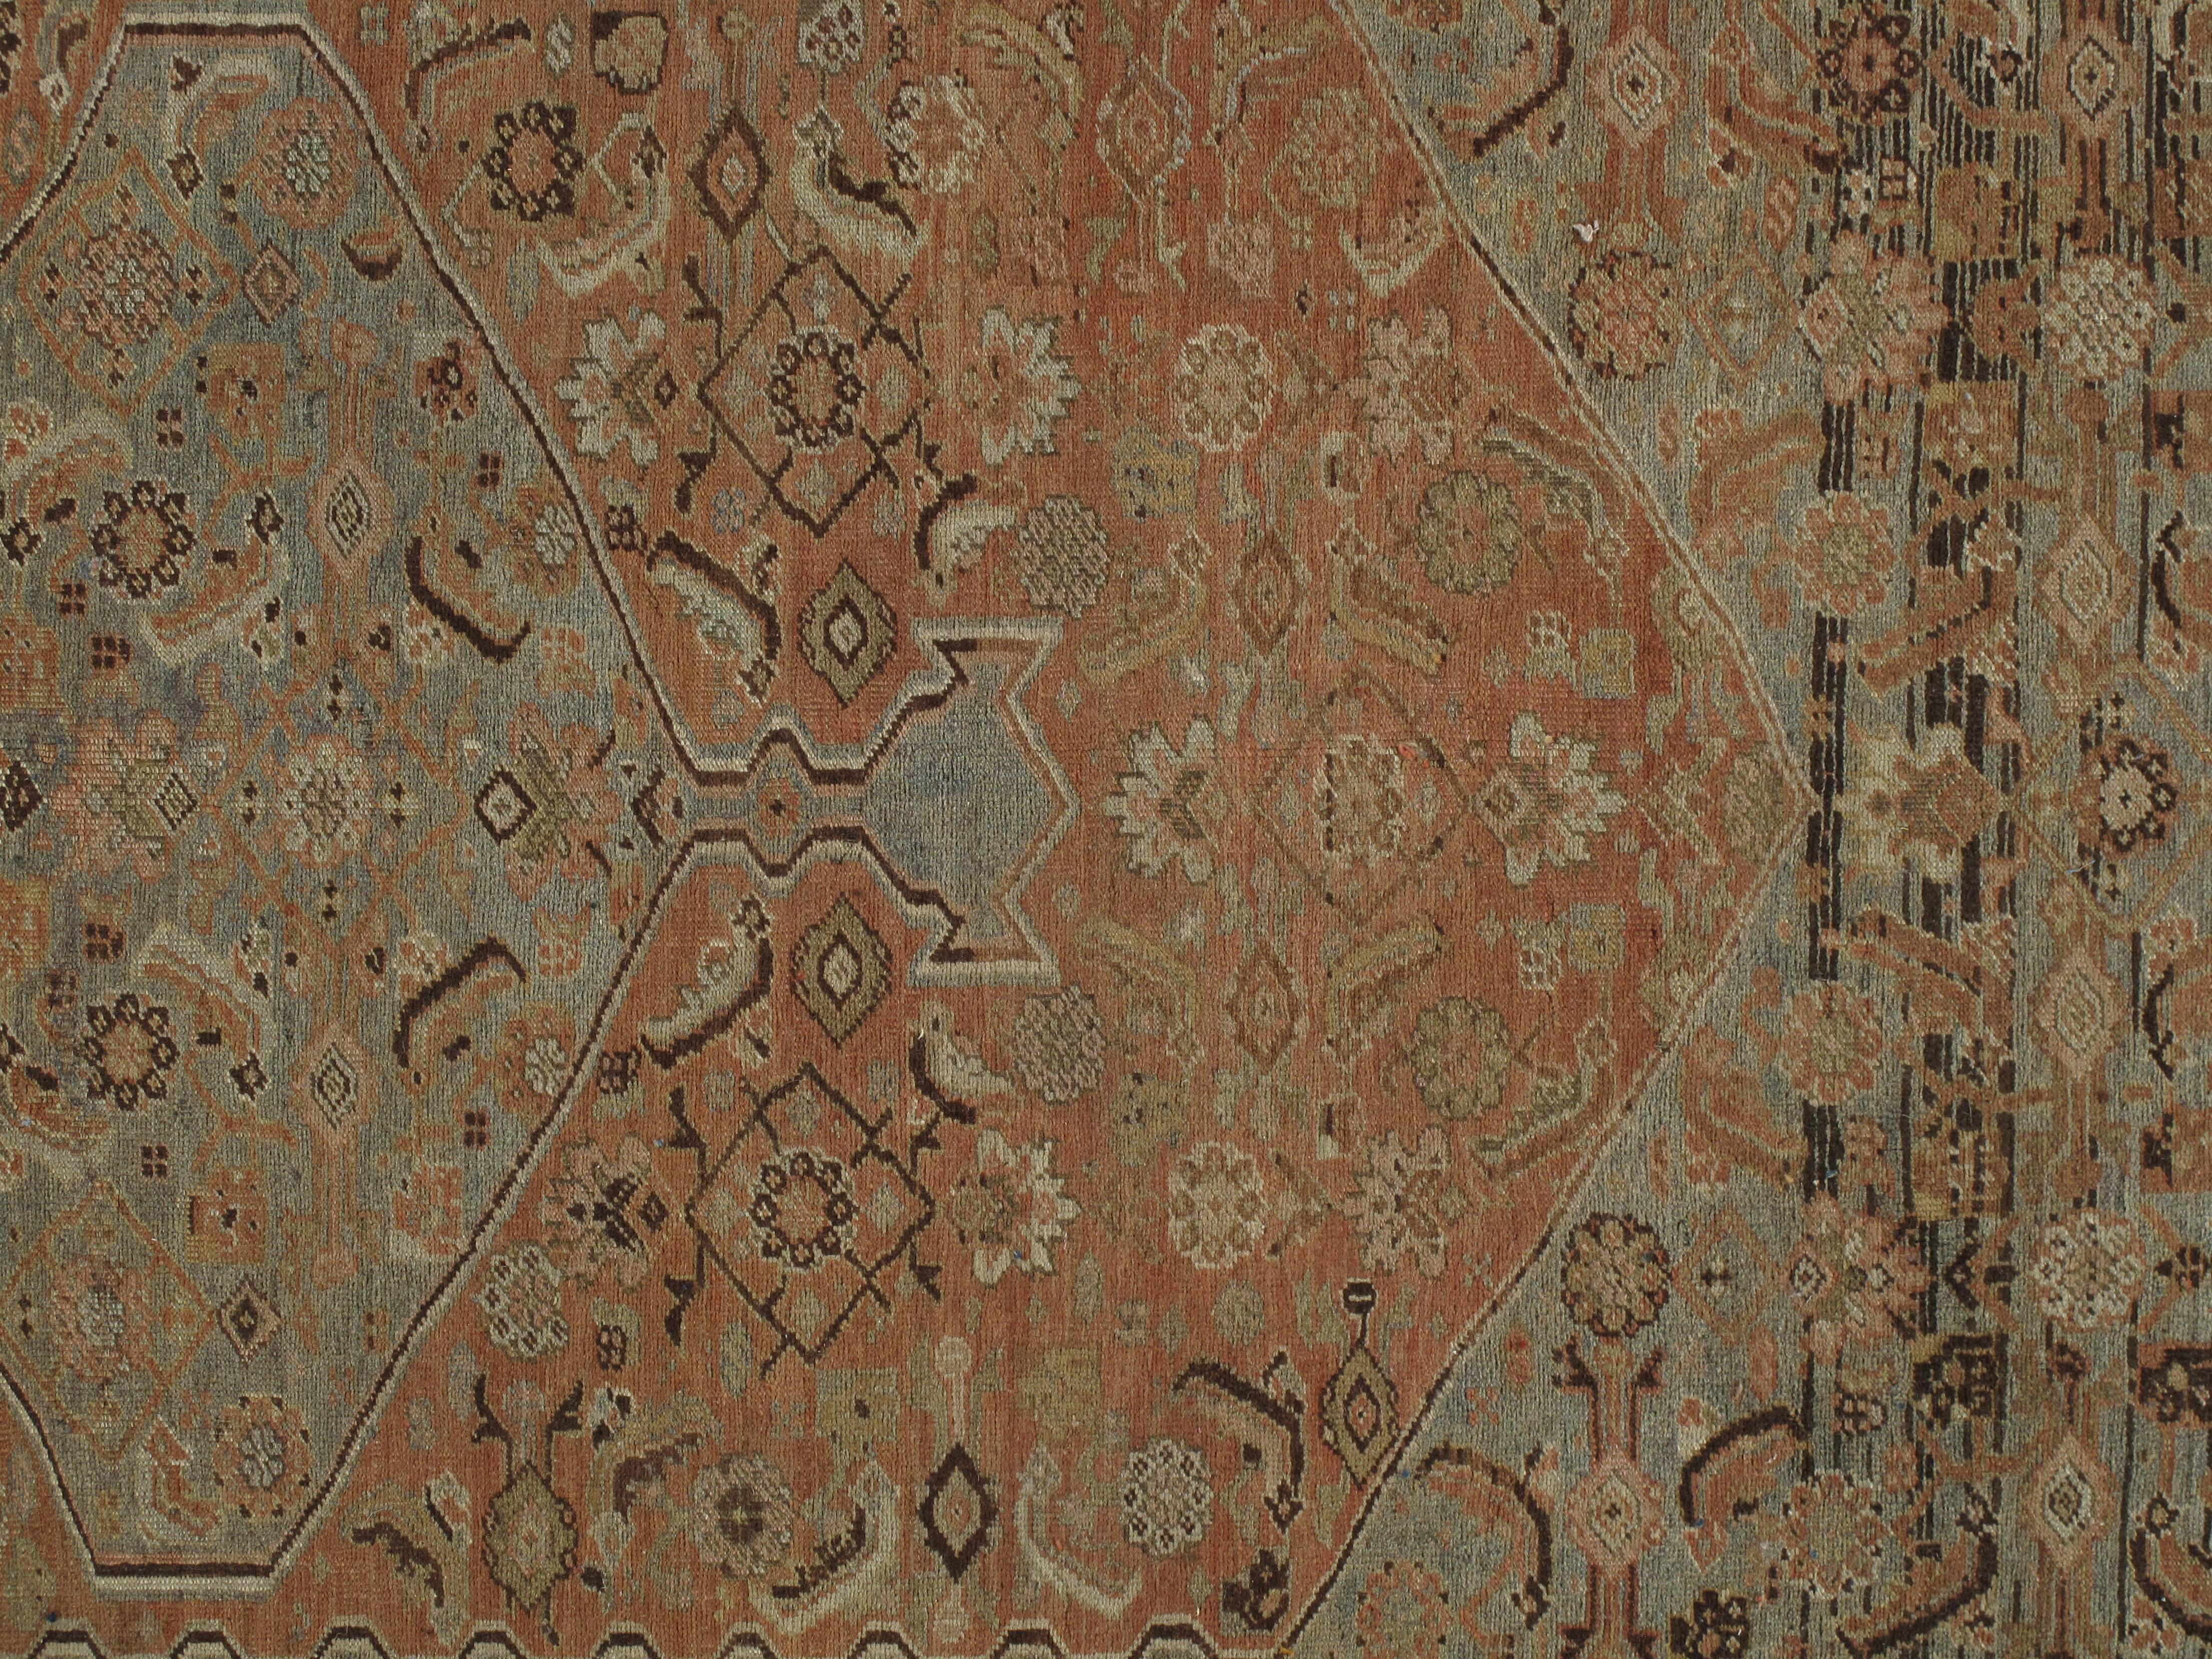 Bijar rugs are often called the Iron Rugs of Persia. The Bijar is a heavy durable rug that has been very popular in the United States. Most Bijar carpets are woven by Kurds in the Gerus area, this Gallery size carpet is a great example of Bijar